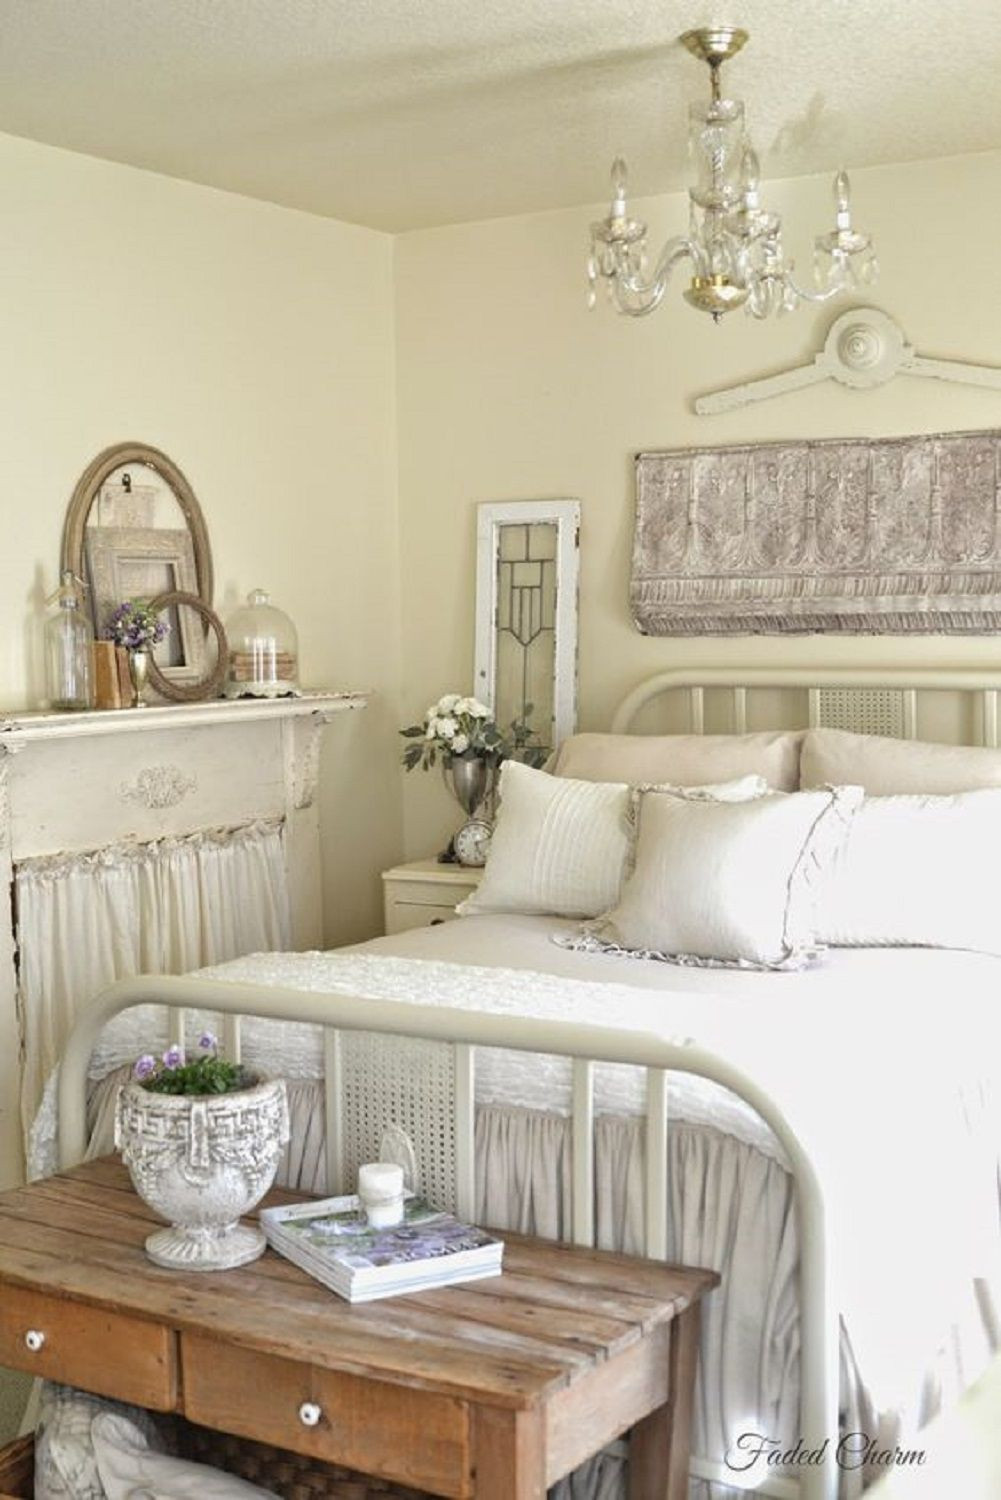 French Bedroom Decor
 Ideas for French Country Style Bedroom Decor